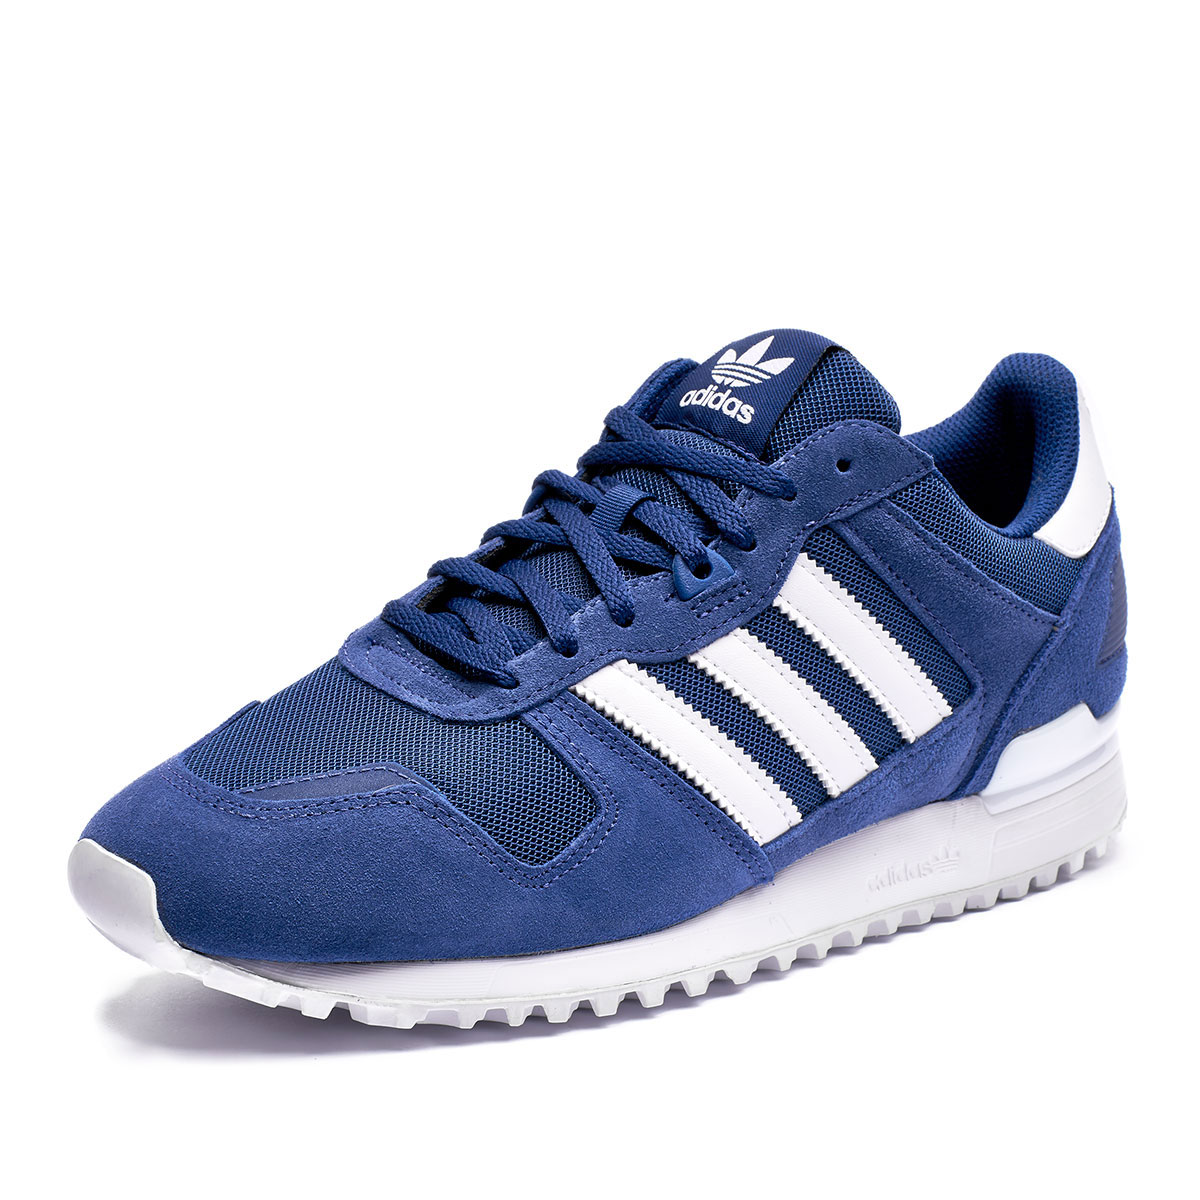 adidas ZX 700  BY9267